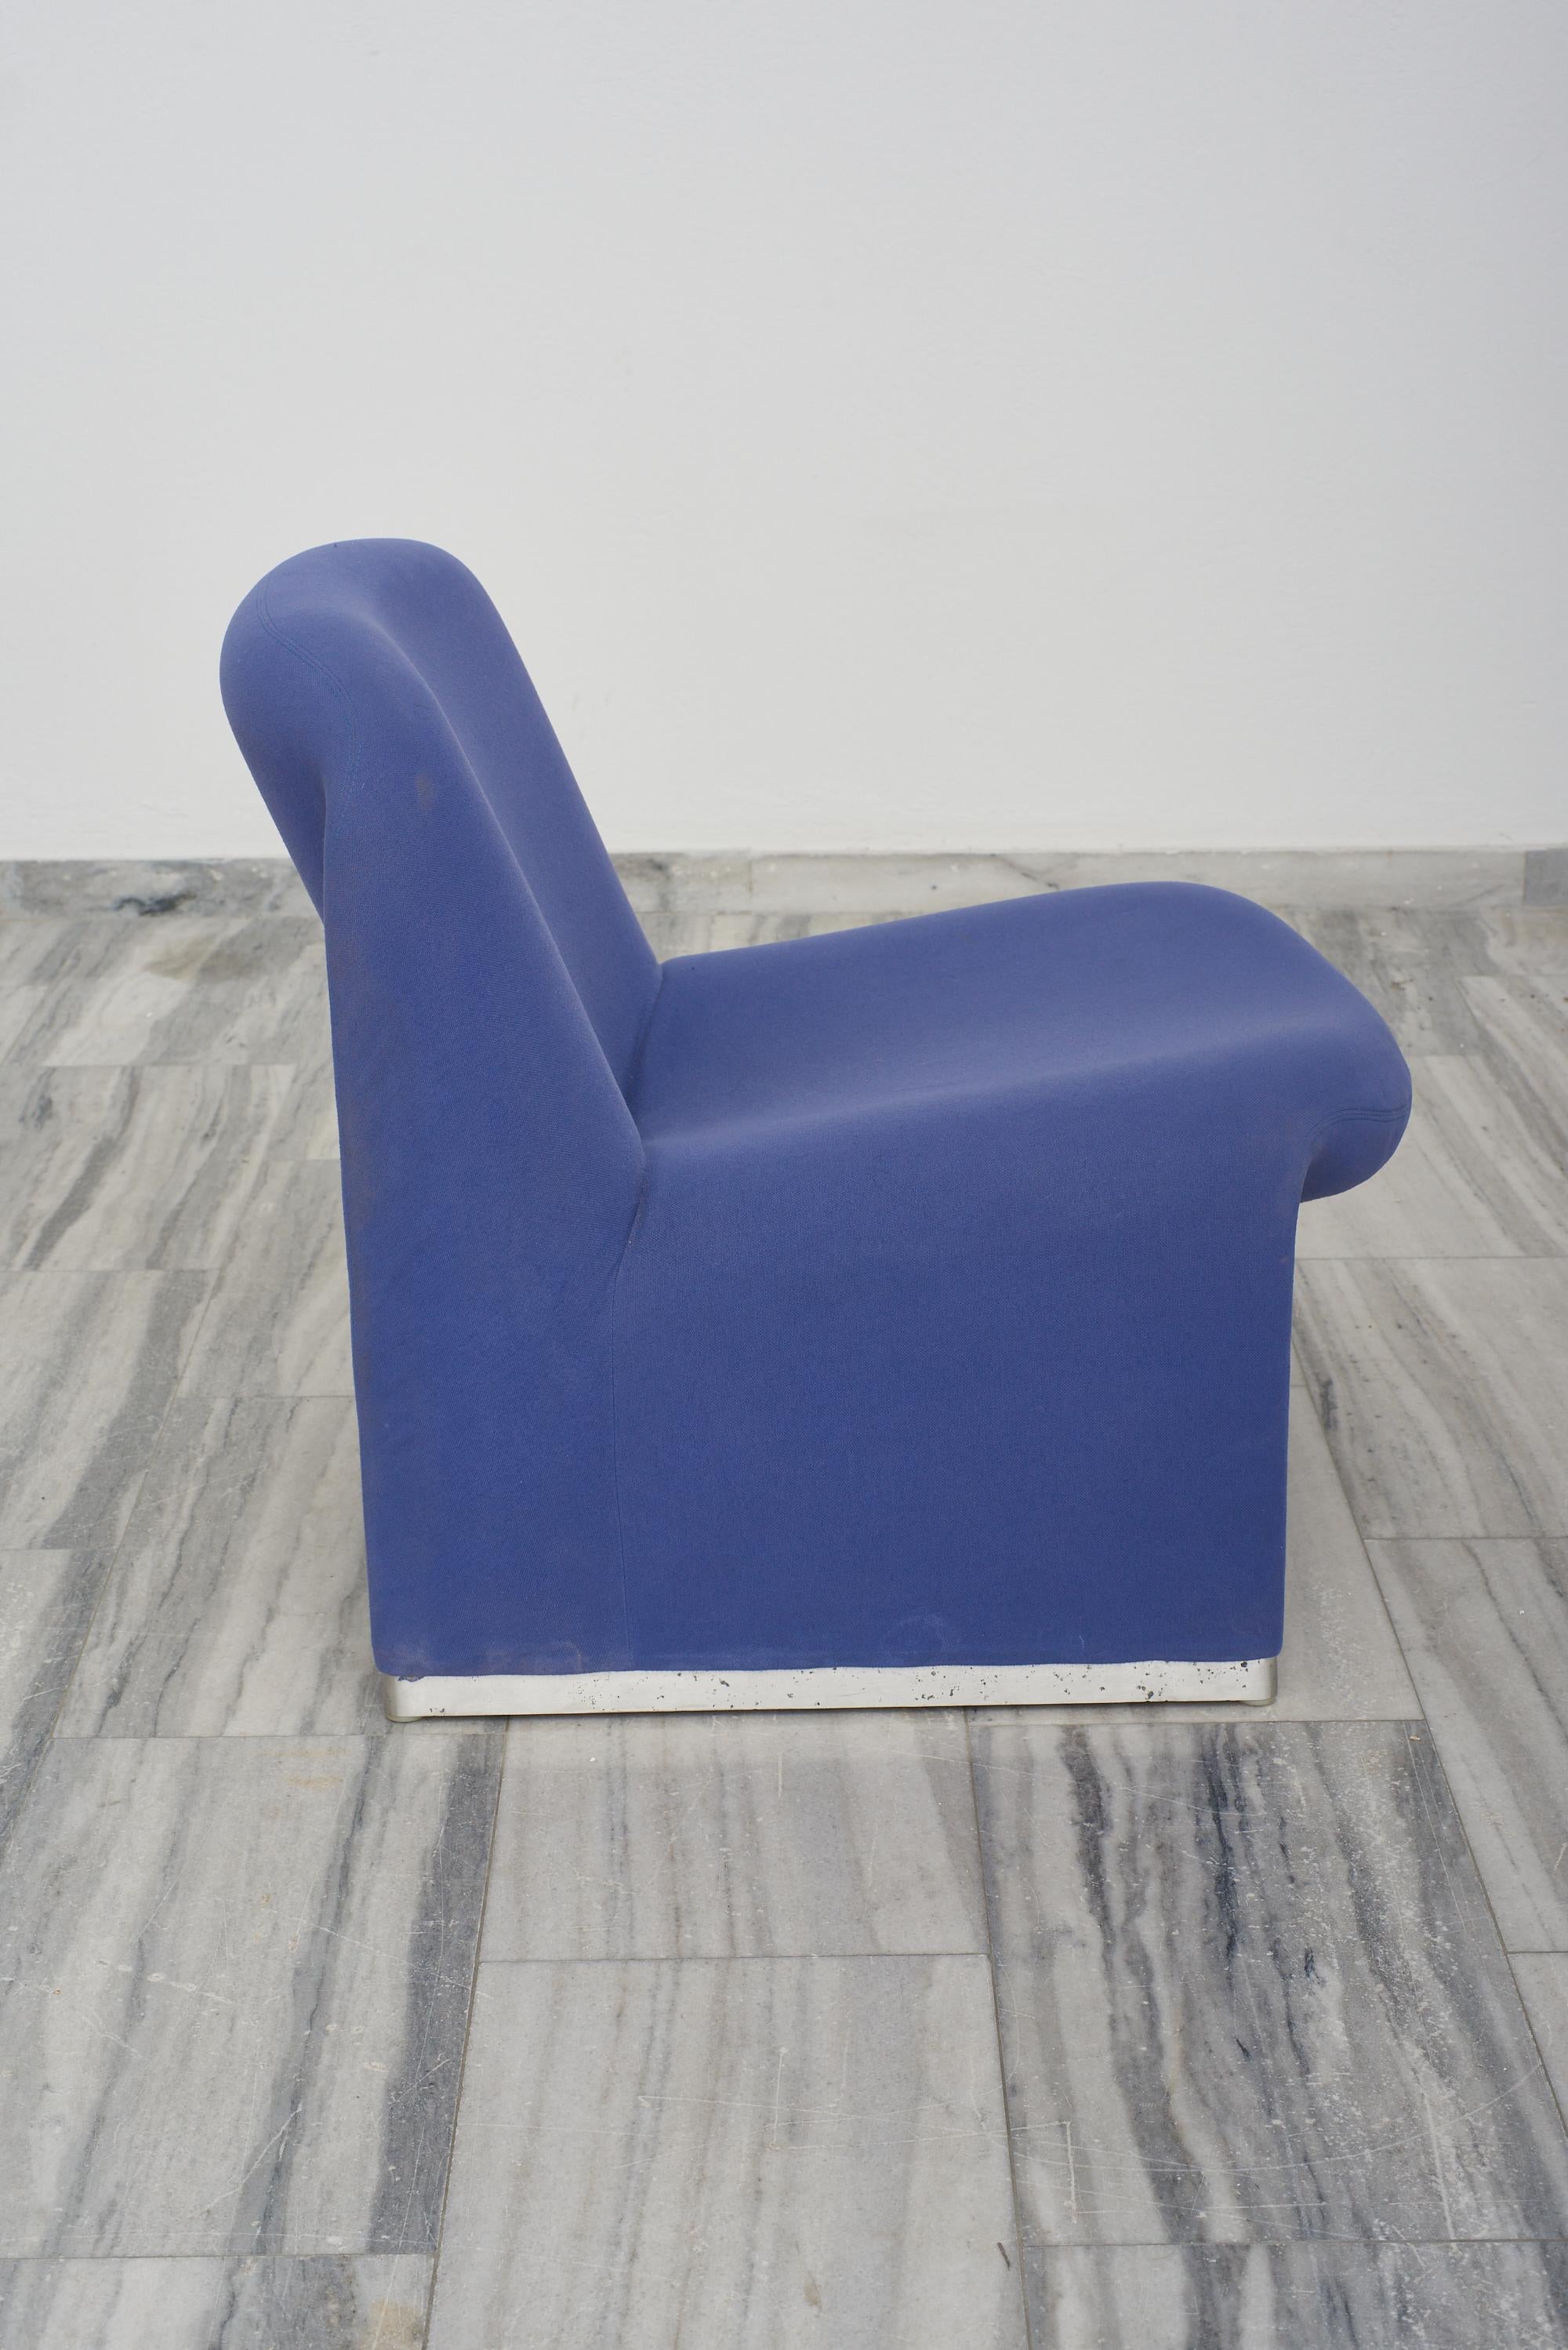 Space Age Purple Alky chair by Giancarlo Piretti for Castelli, 1969 For Sale